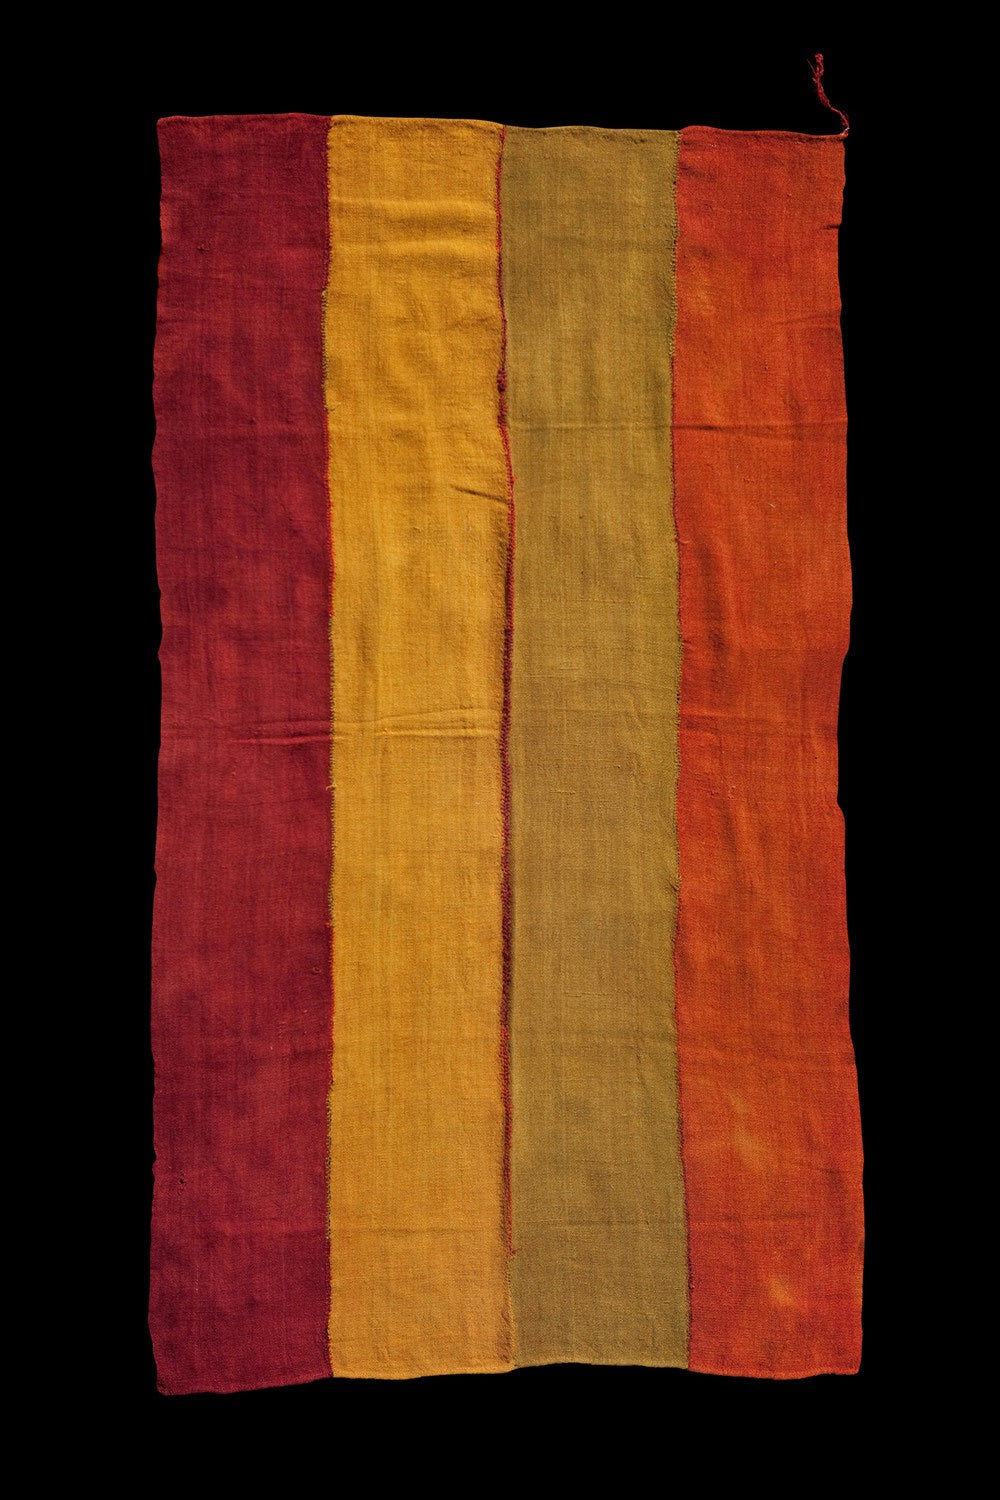 Four Band Sevas Perde with Yellow, Burnt Orange, Green and Red Stripes (4' 9" x 8')